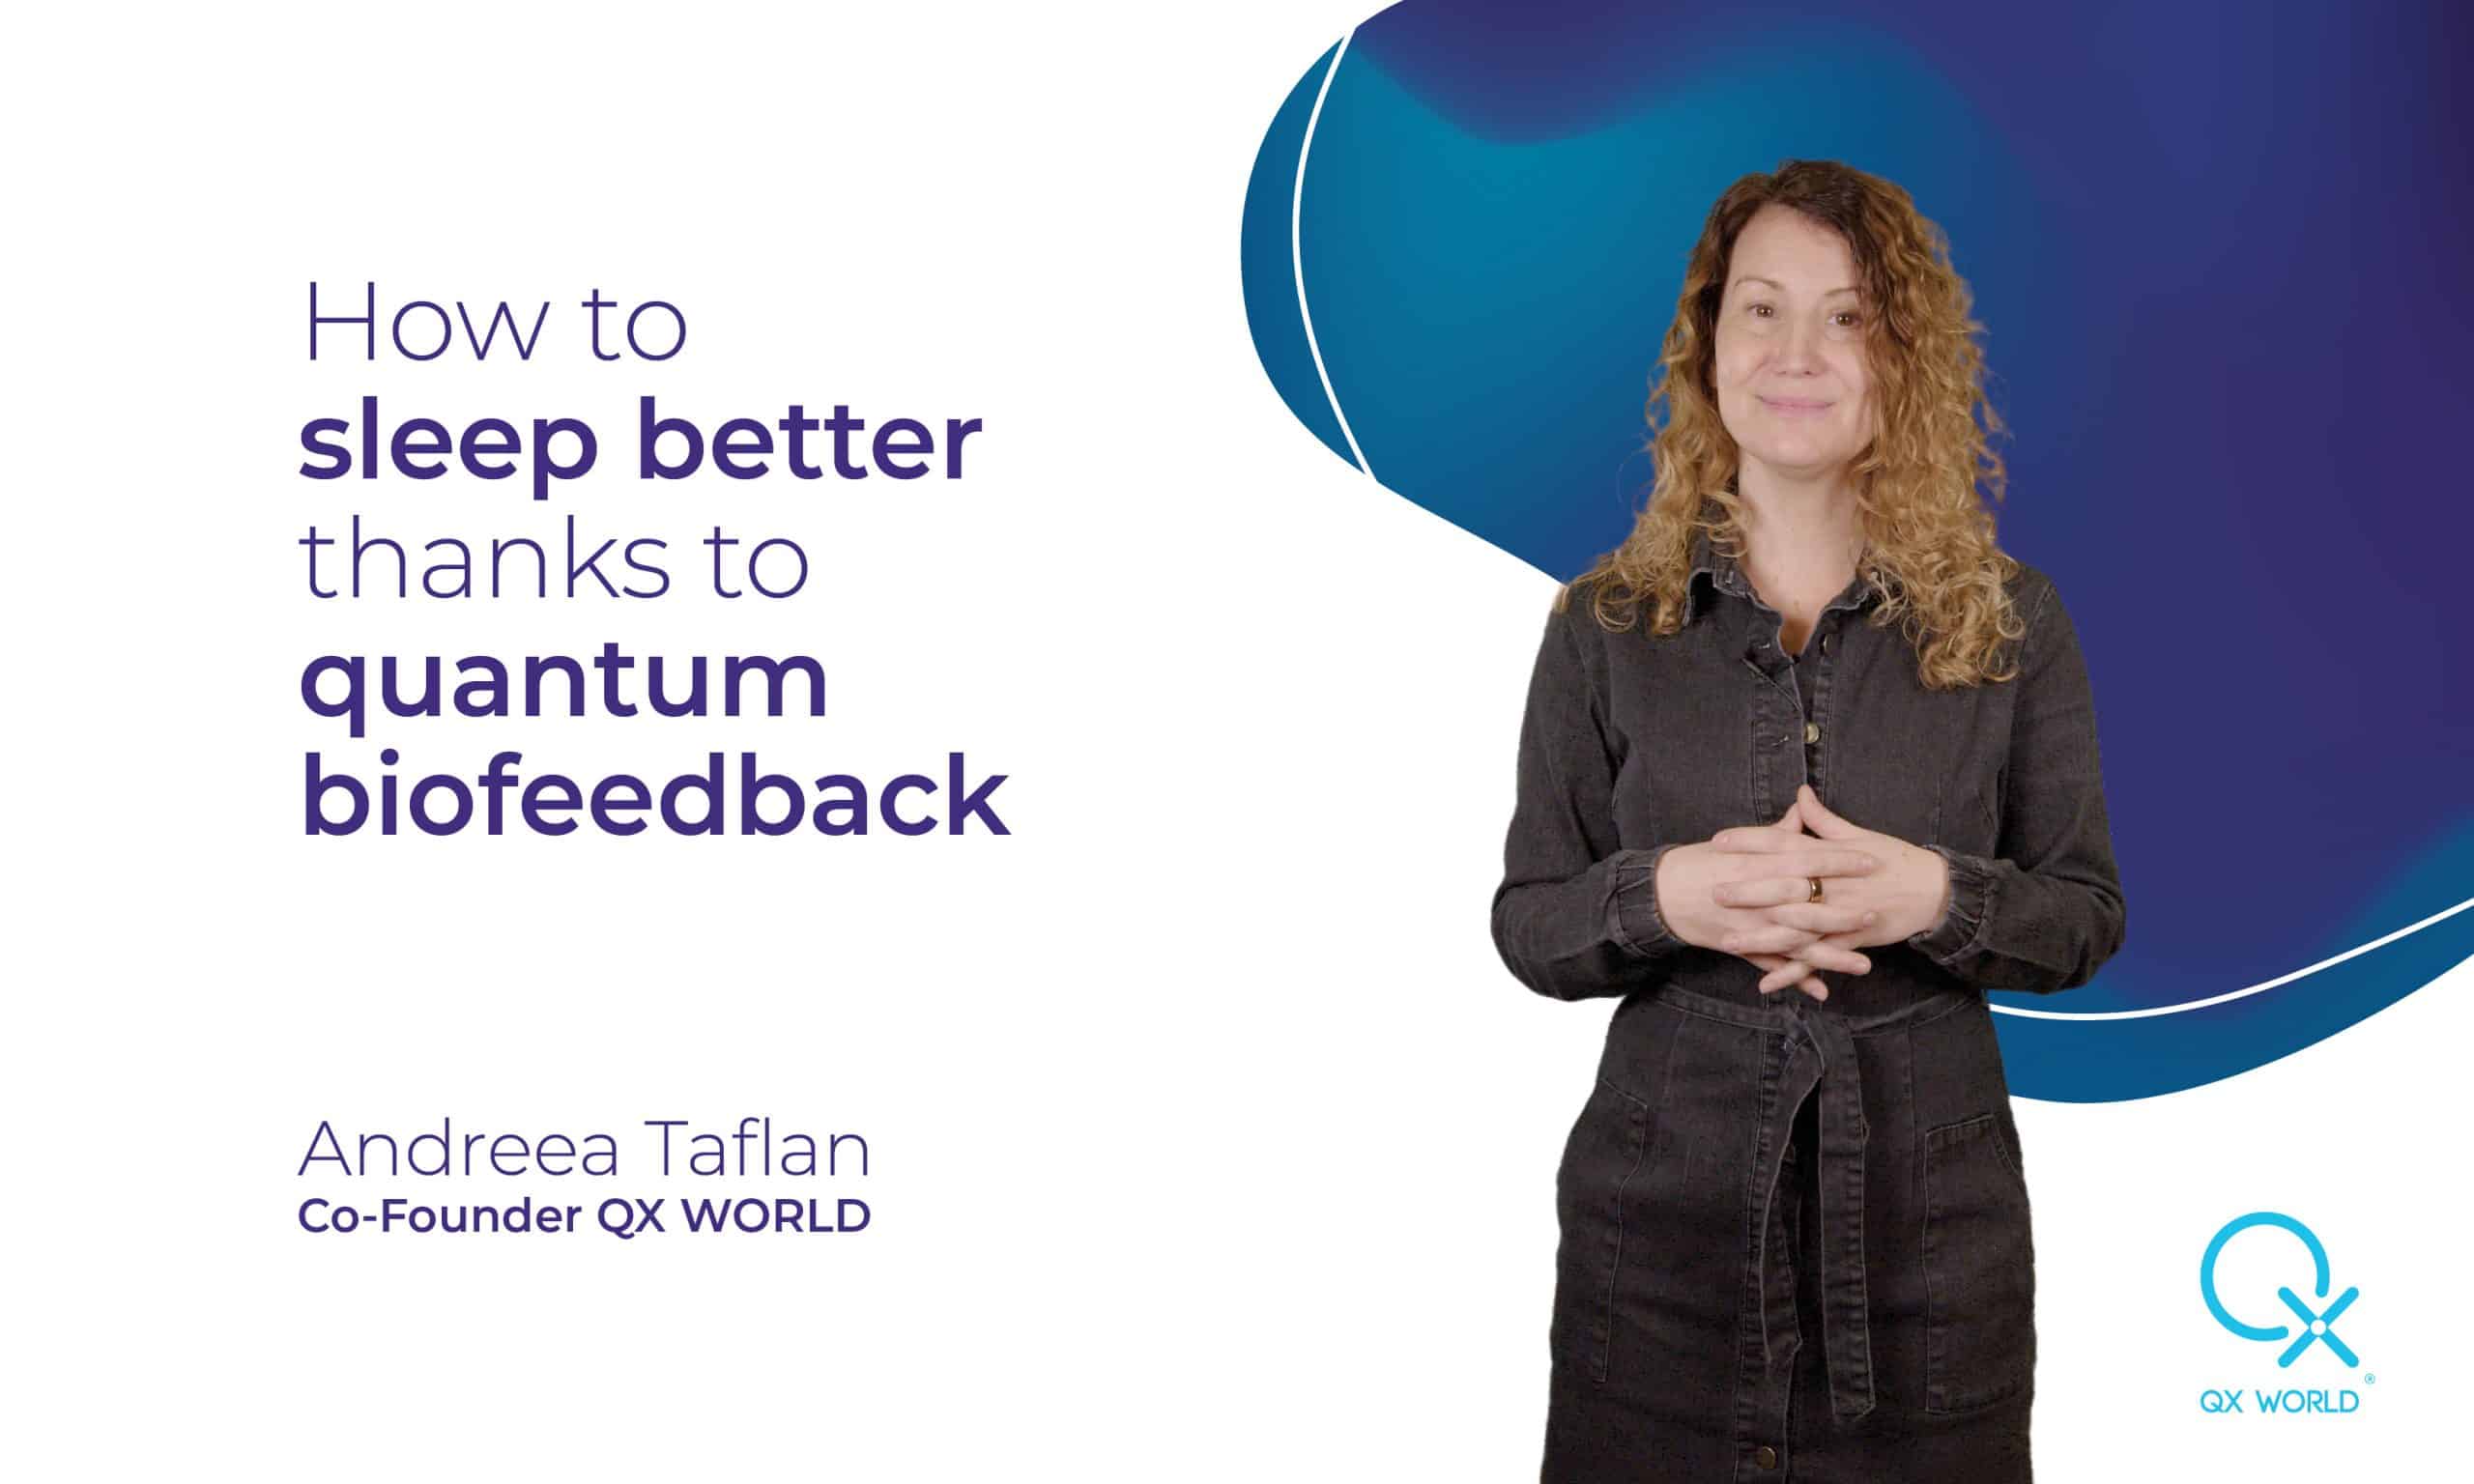 A client who sleeps better thanks to quantum biofeedback sessions